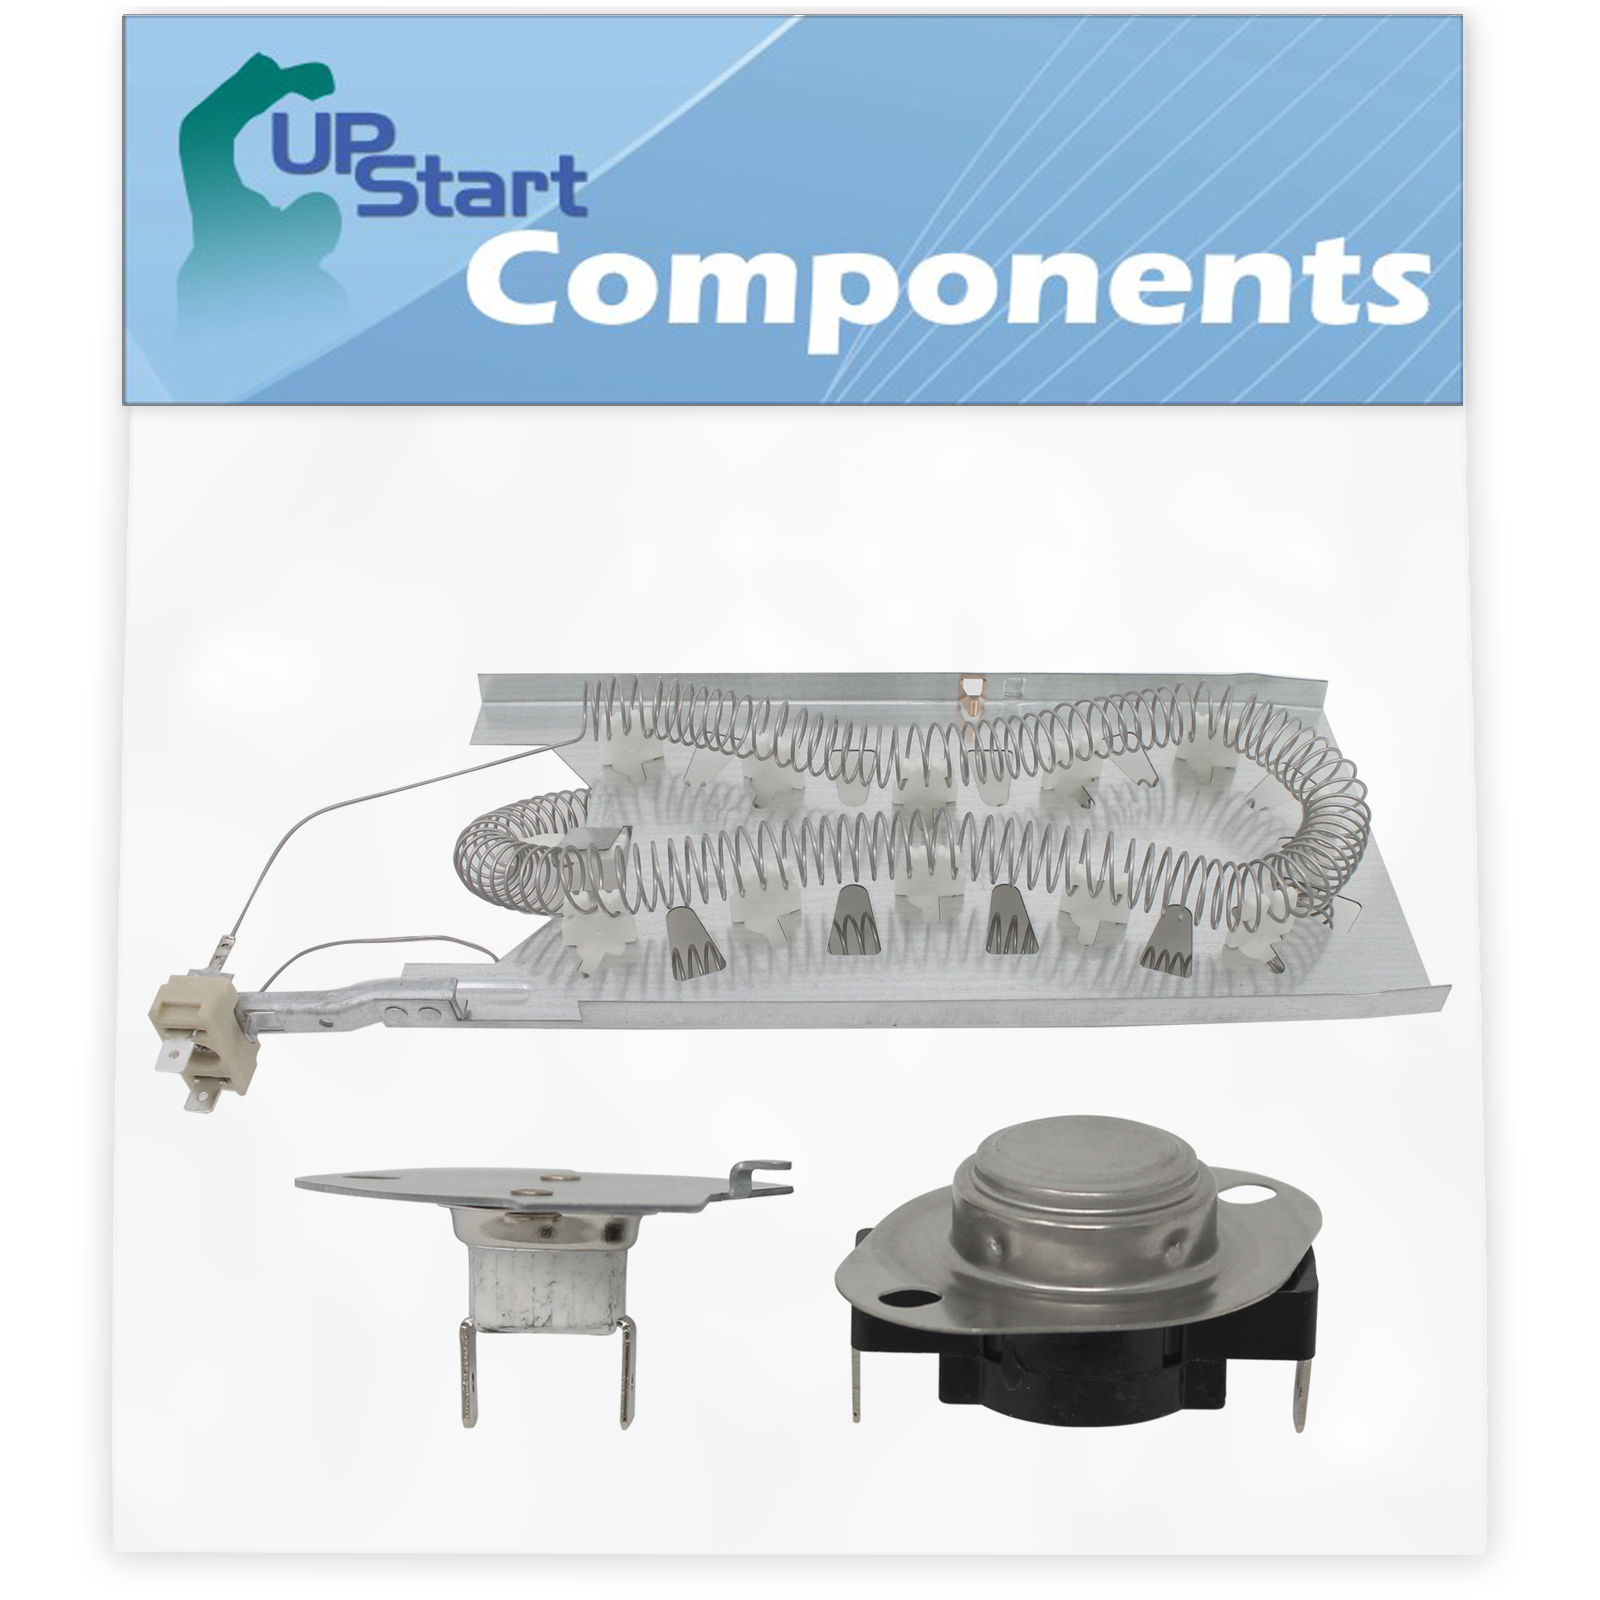 3387747 Dryer Heating Element & 279769 Thermal Cut-Off Kit Replacement for Kenmore / Sears 11063022102 Dryer - Compatible with WP3387747 & 279769 Heater Element & Thermal Fuse Kit - image 1 of 4